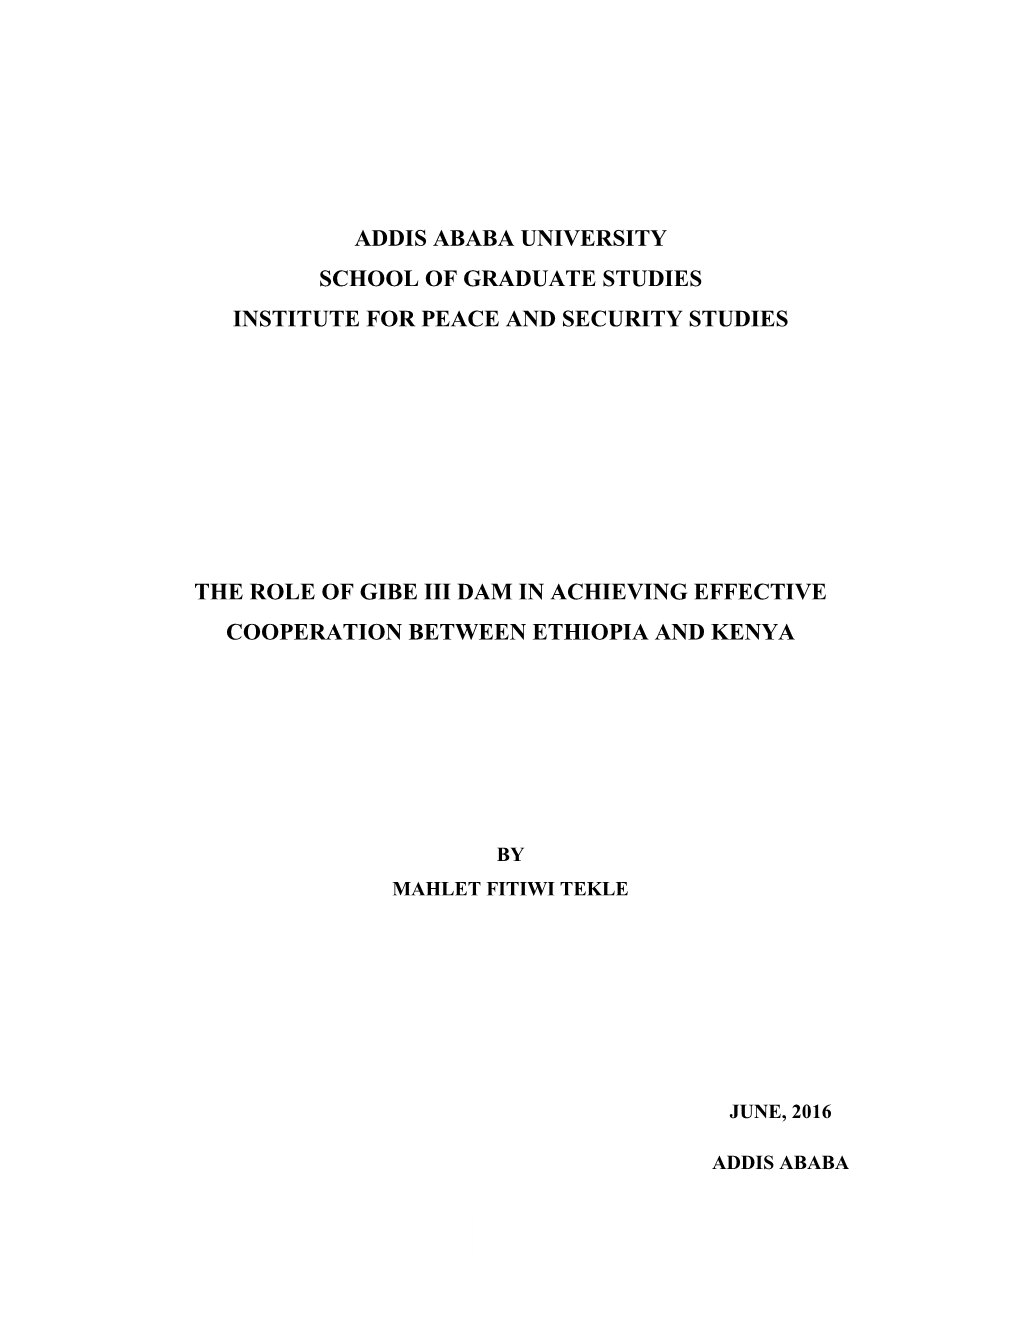 Addis Ababa University School of Graduate Studies Institute for Peace and Security Studies